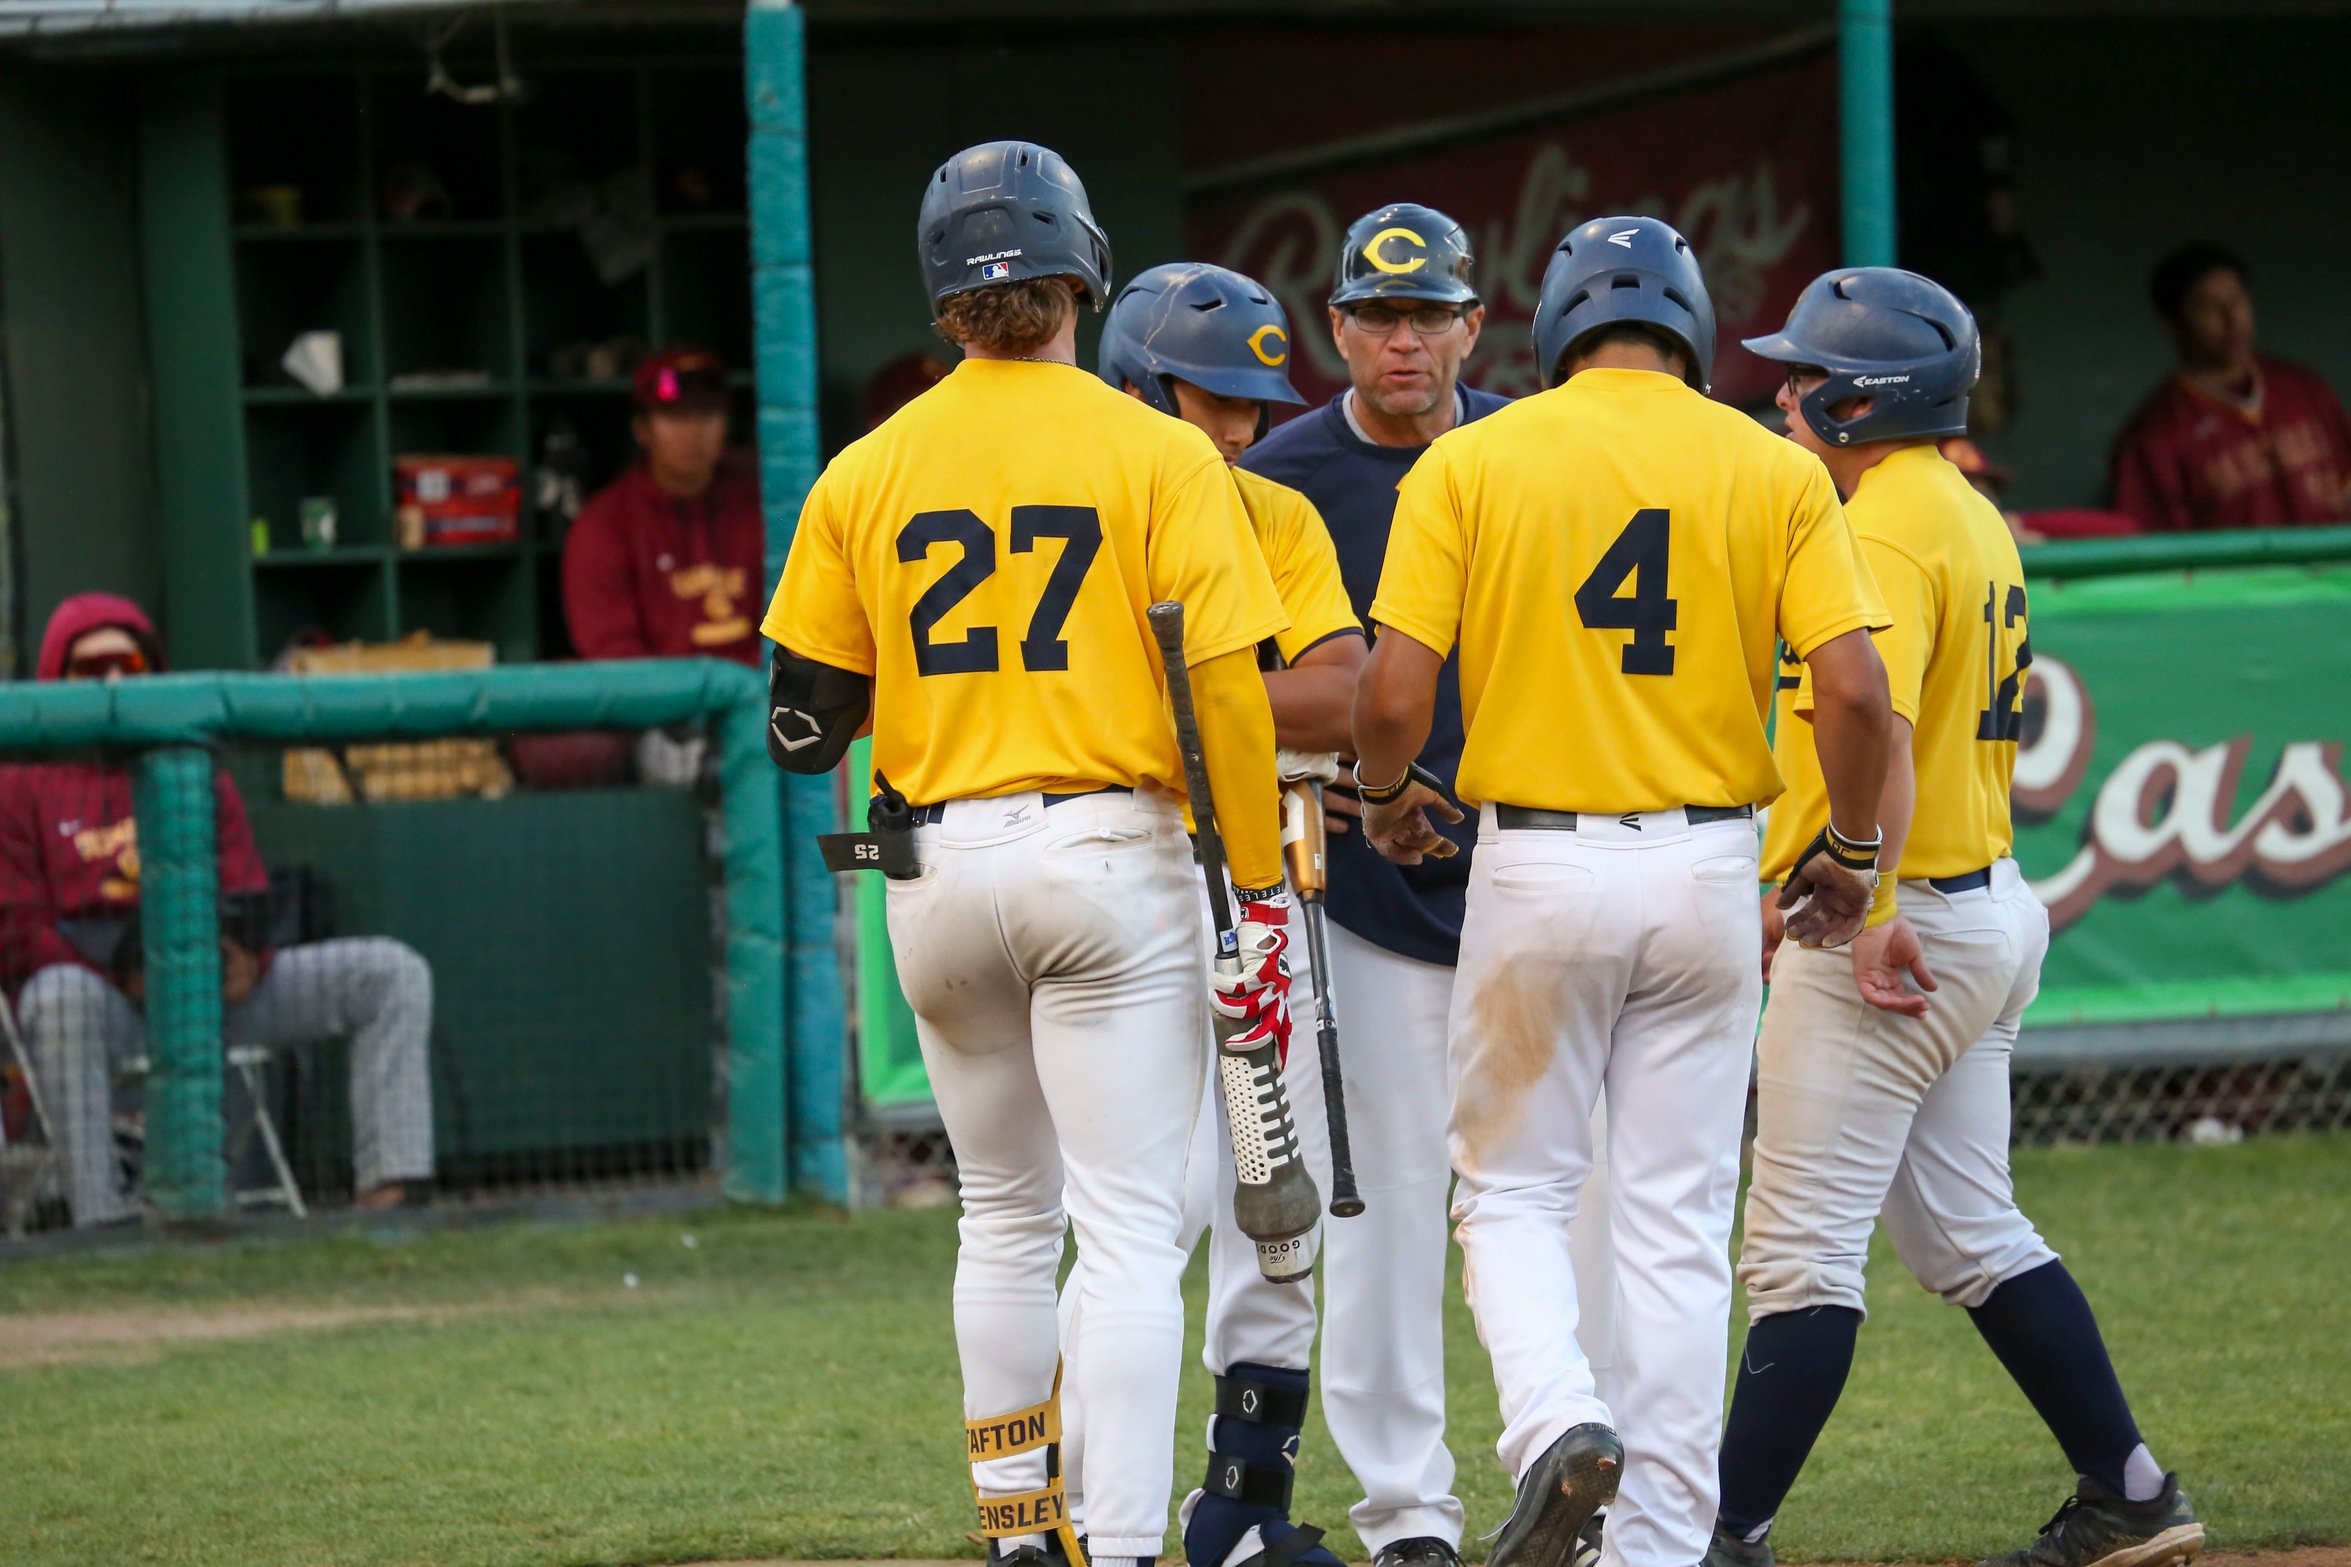 College of the Canyons baseball vs. Glendale College on Saturday, May 7.